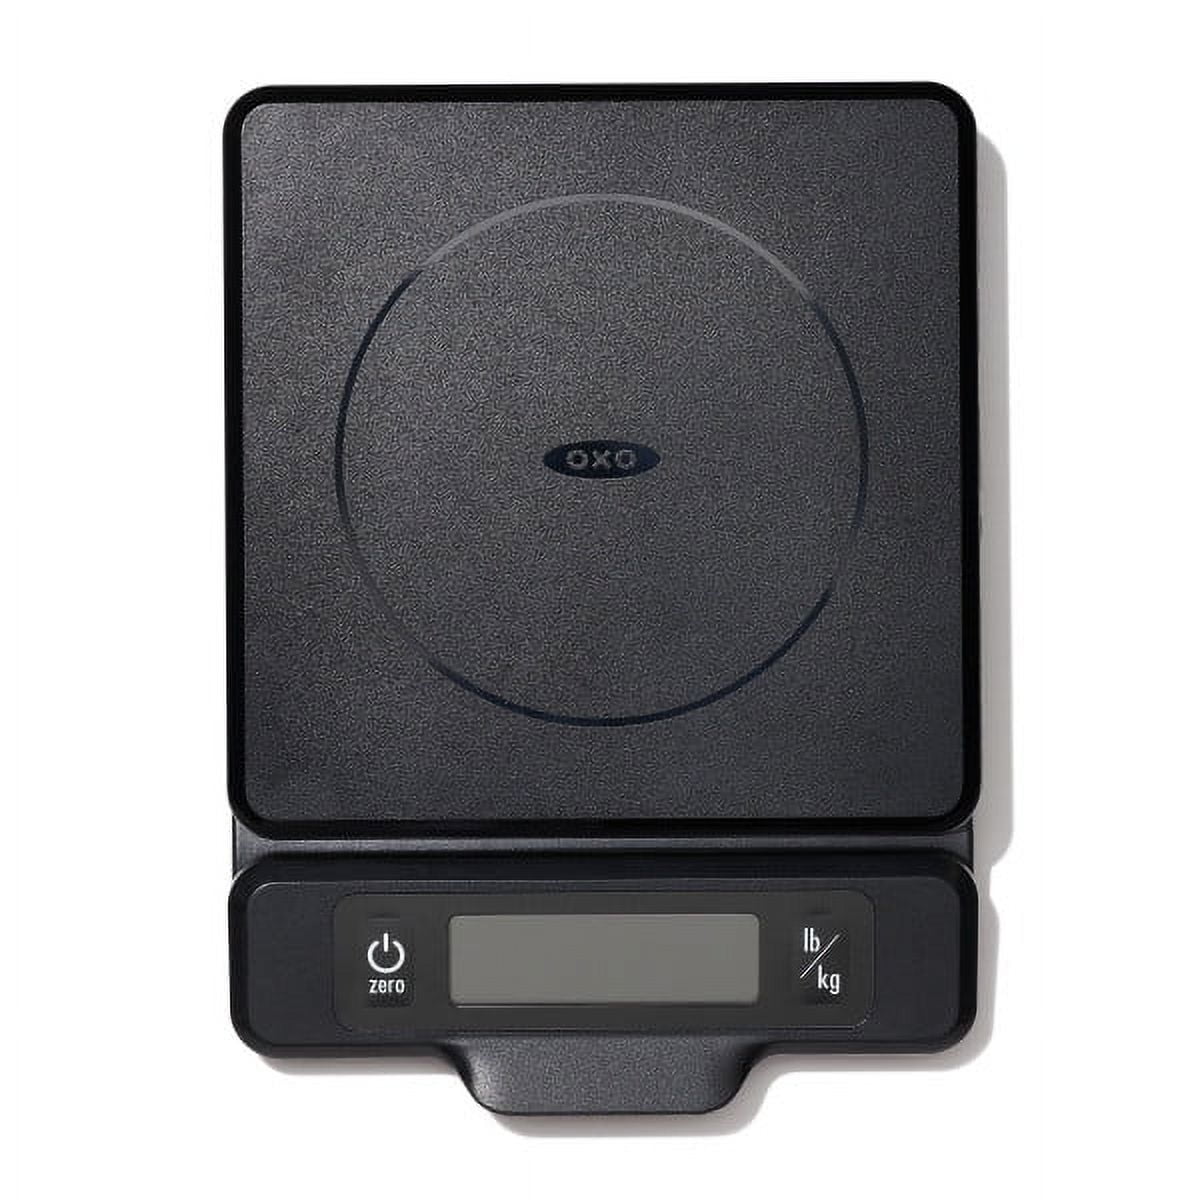 Oxo 5lb Digital Kitchen Scale Faulty Button Replacement - iFixit Repair  Guide